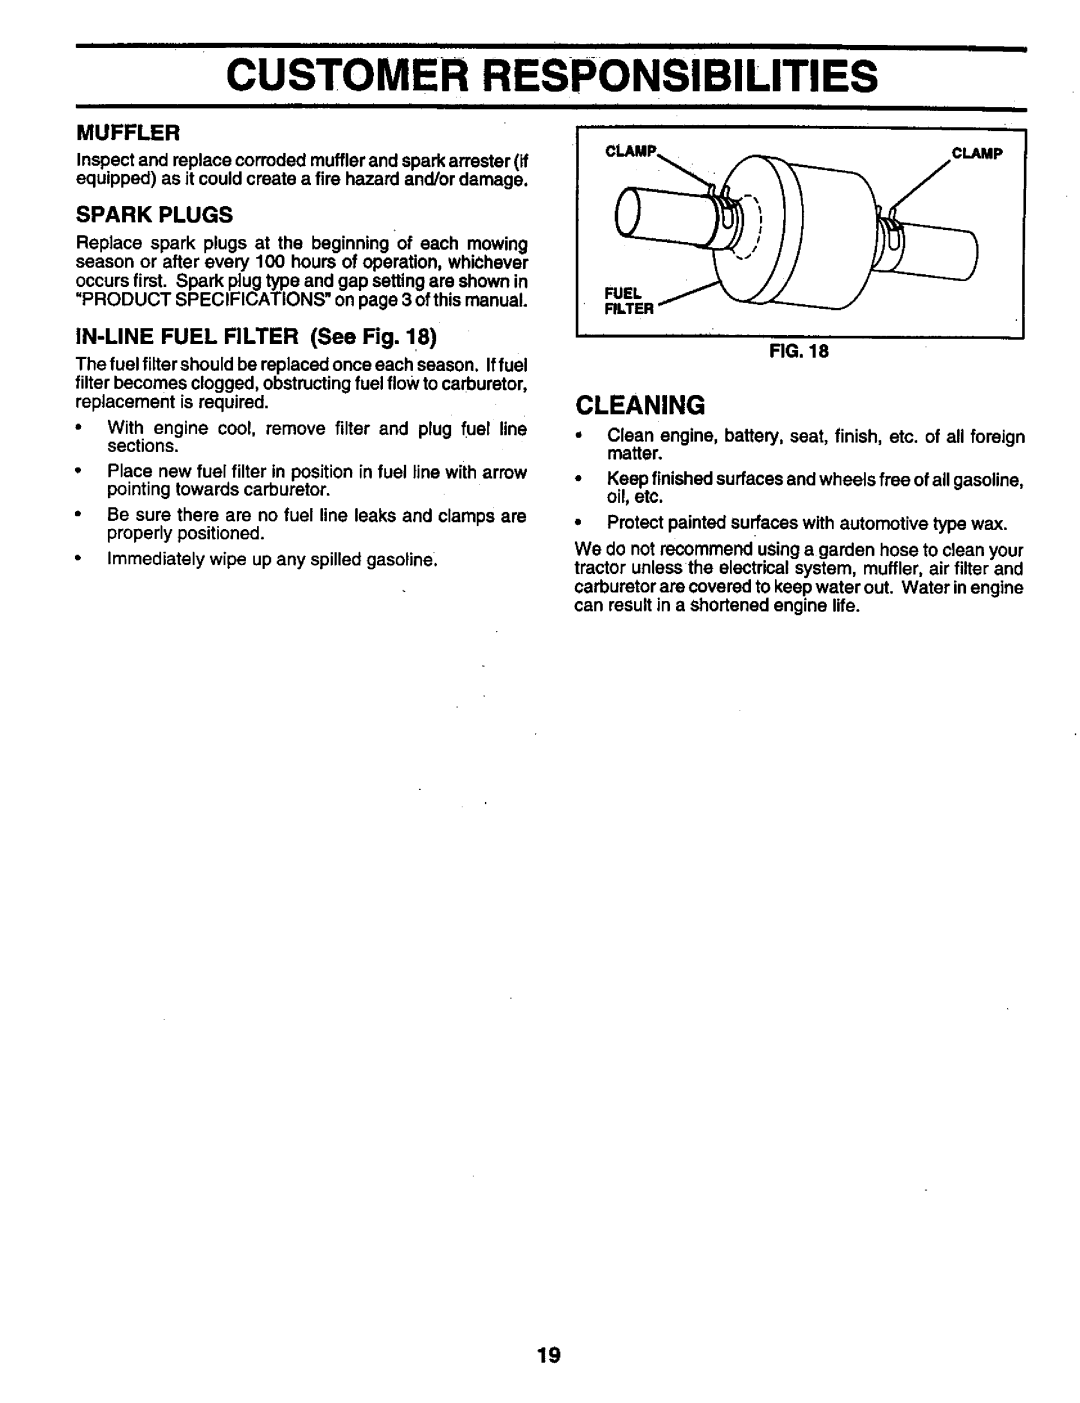 Craftsman 917.259561 owner manual Customer Responsibilities, Cleaning, Spark Plugs, IN-LINEFUEL FILTER See Fig 